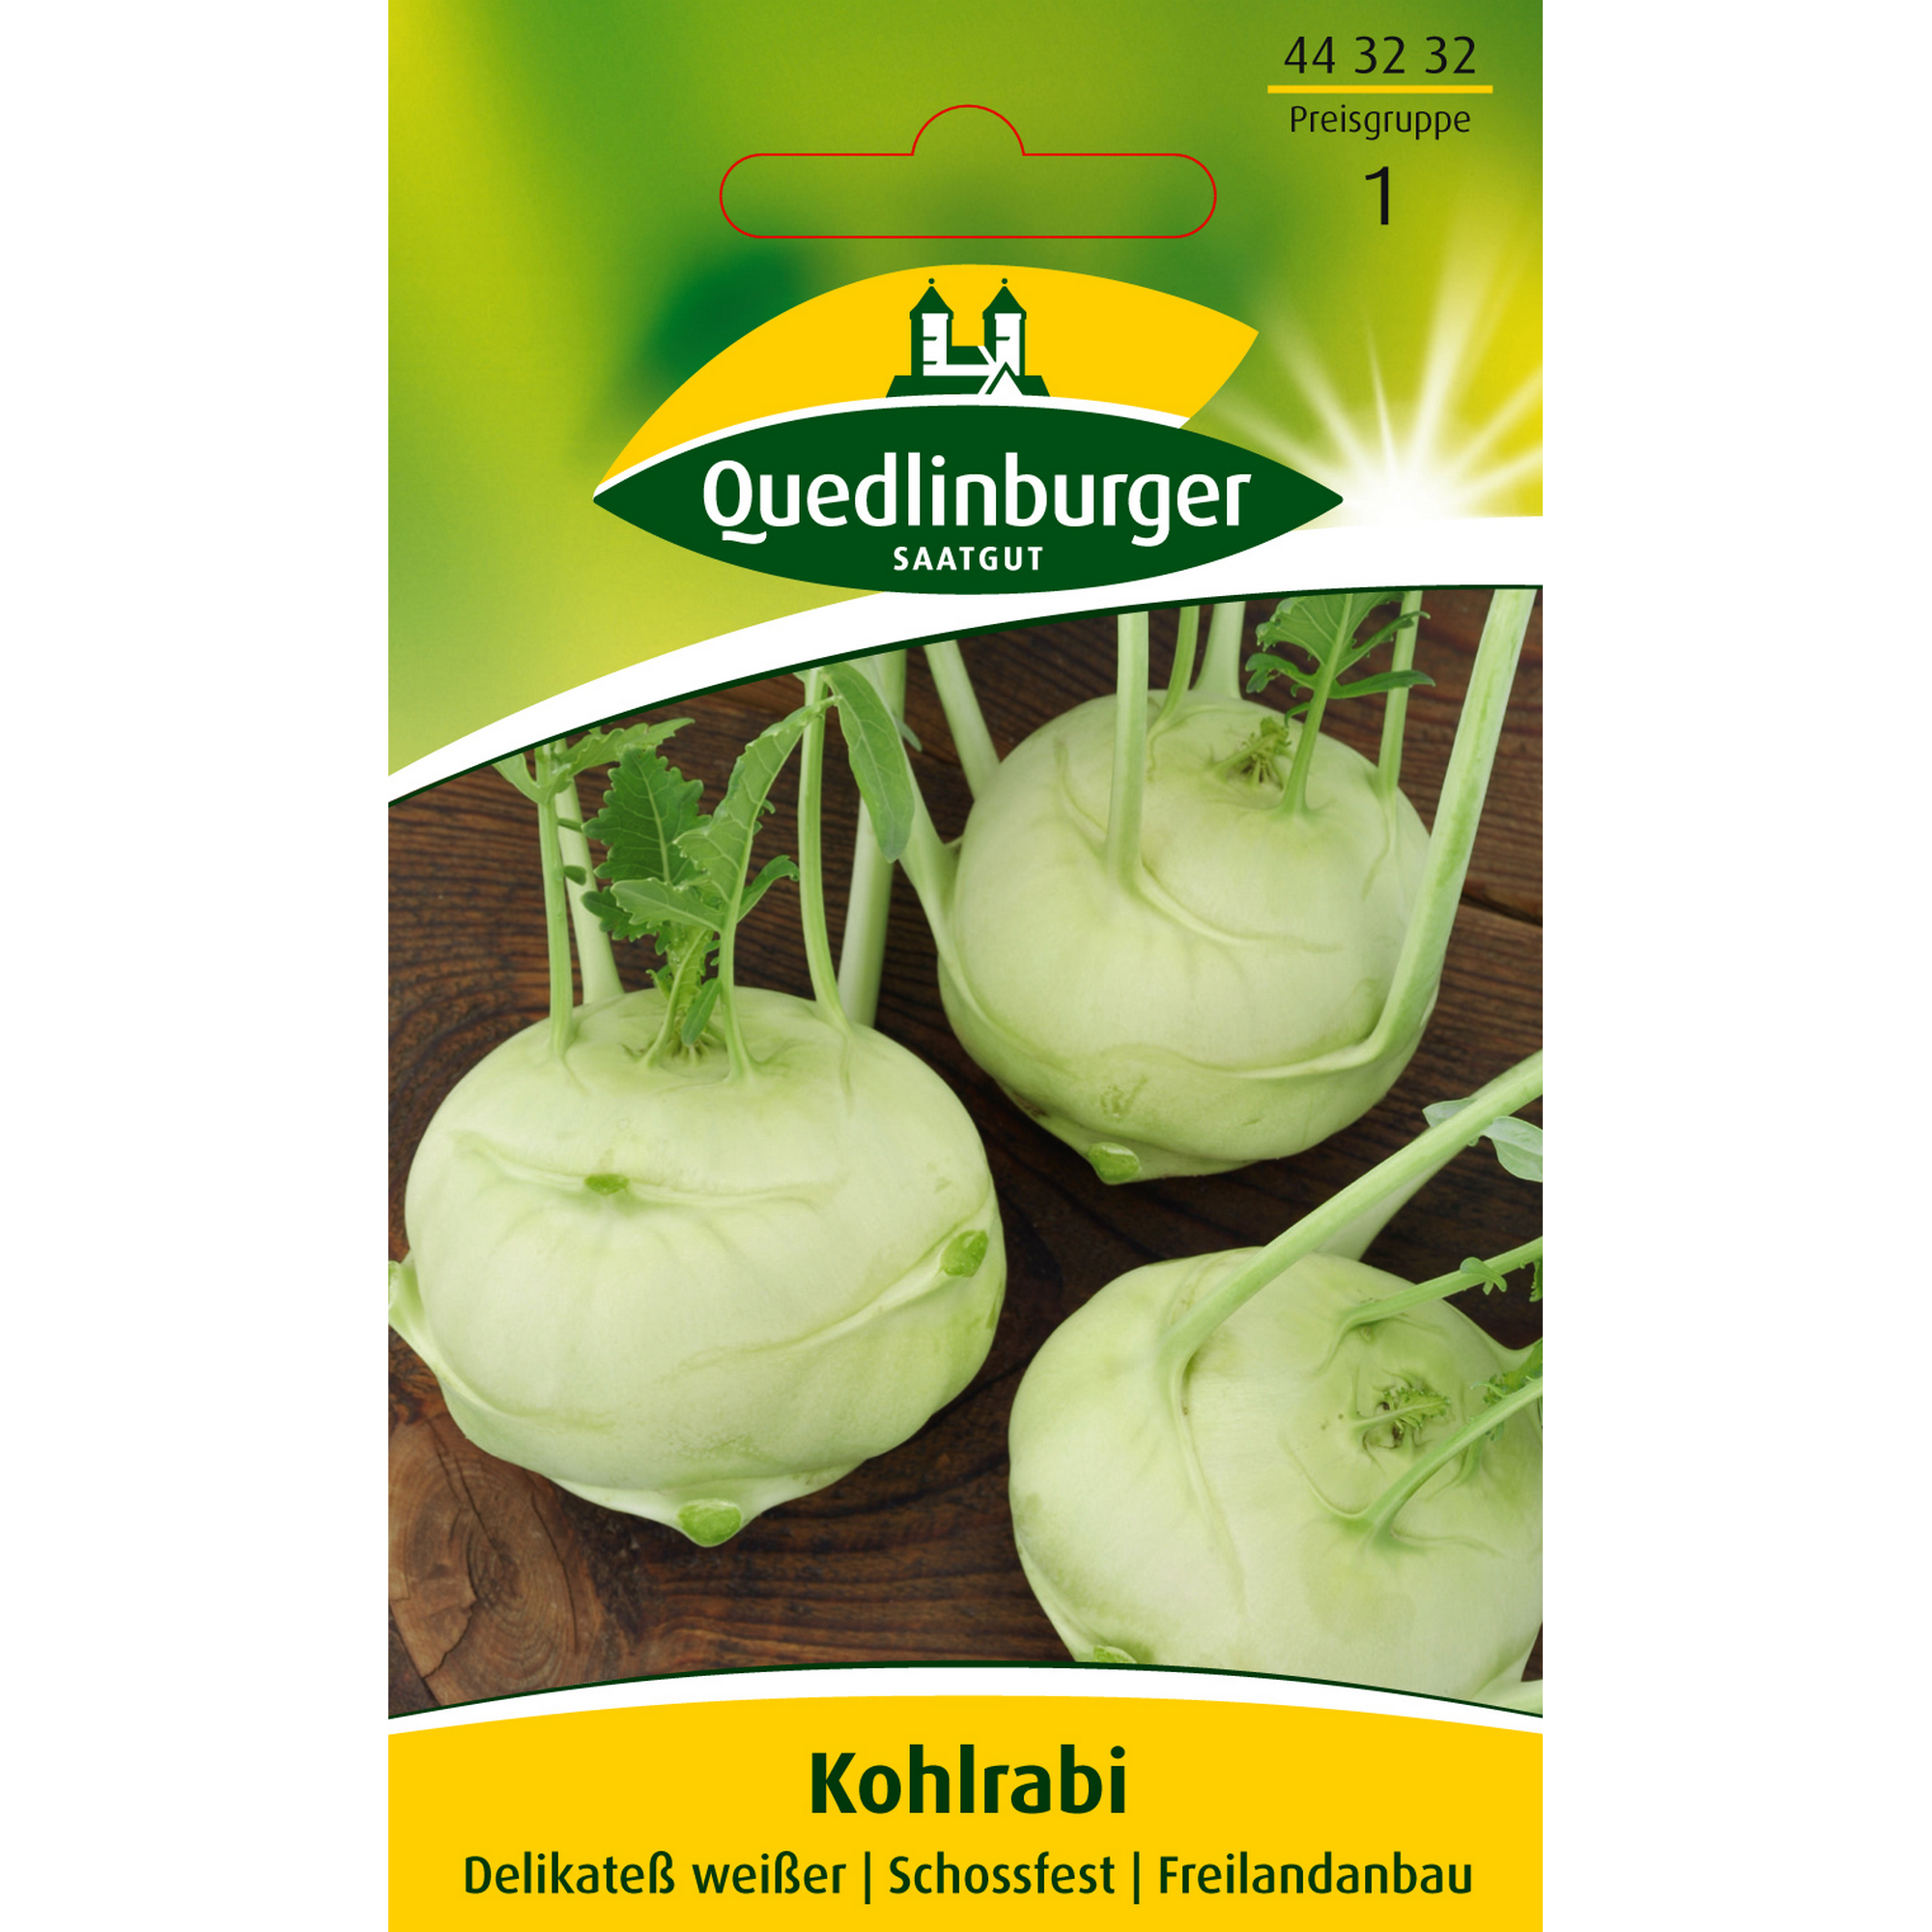 Kohlrabi 'Delikateß weißer' + product picture